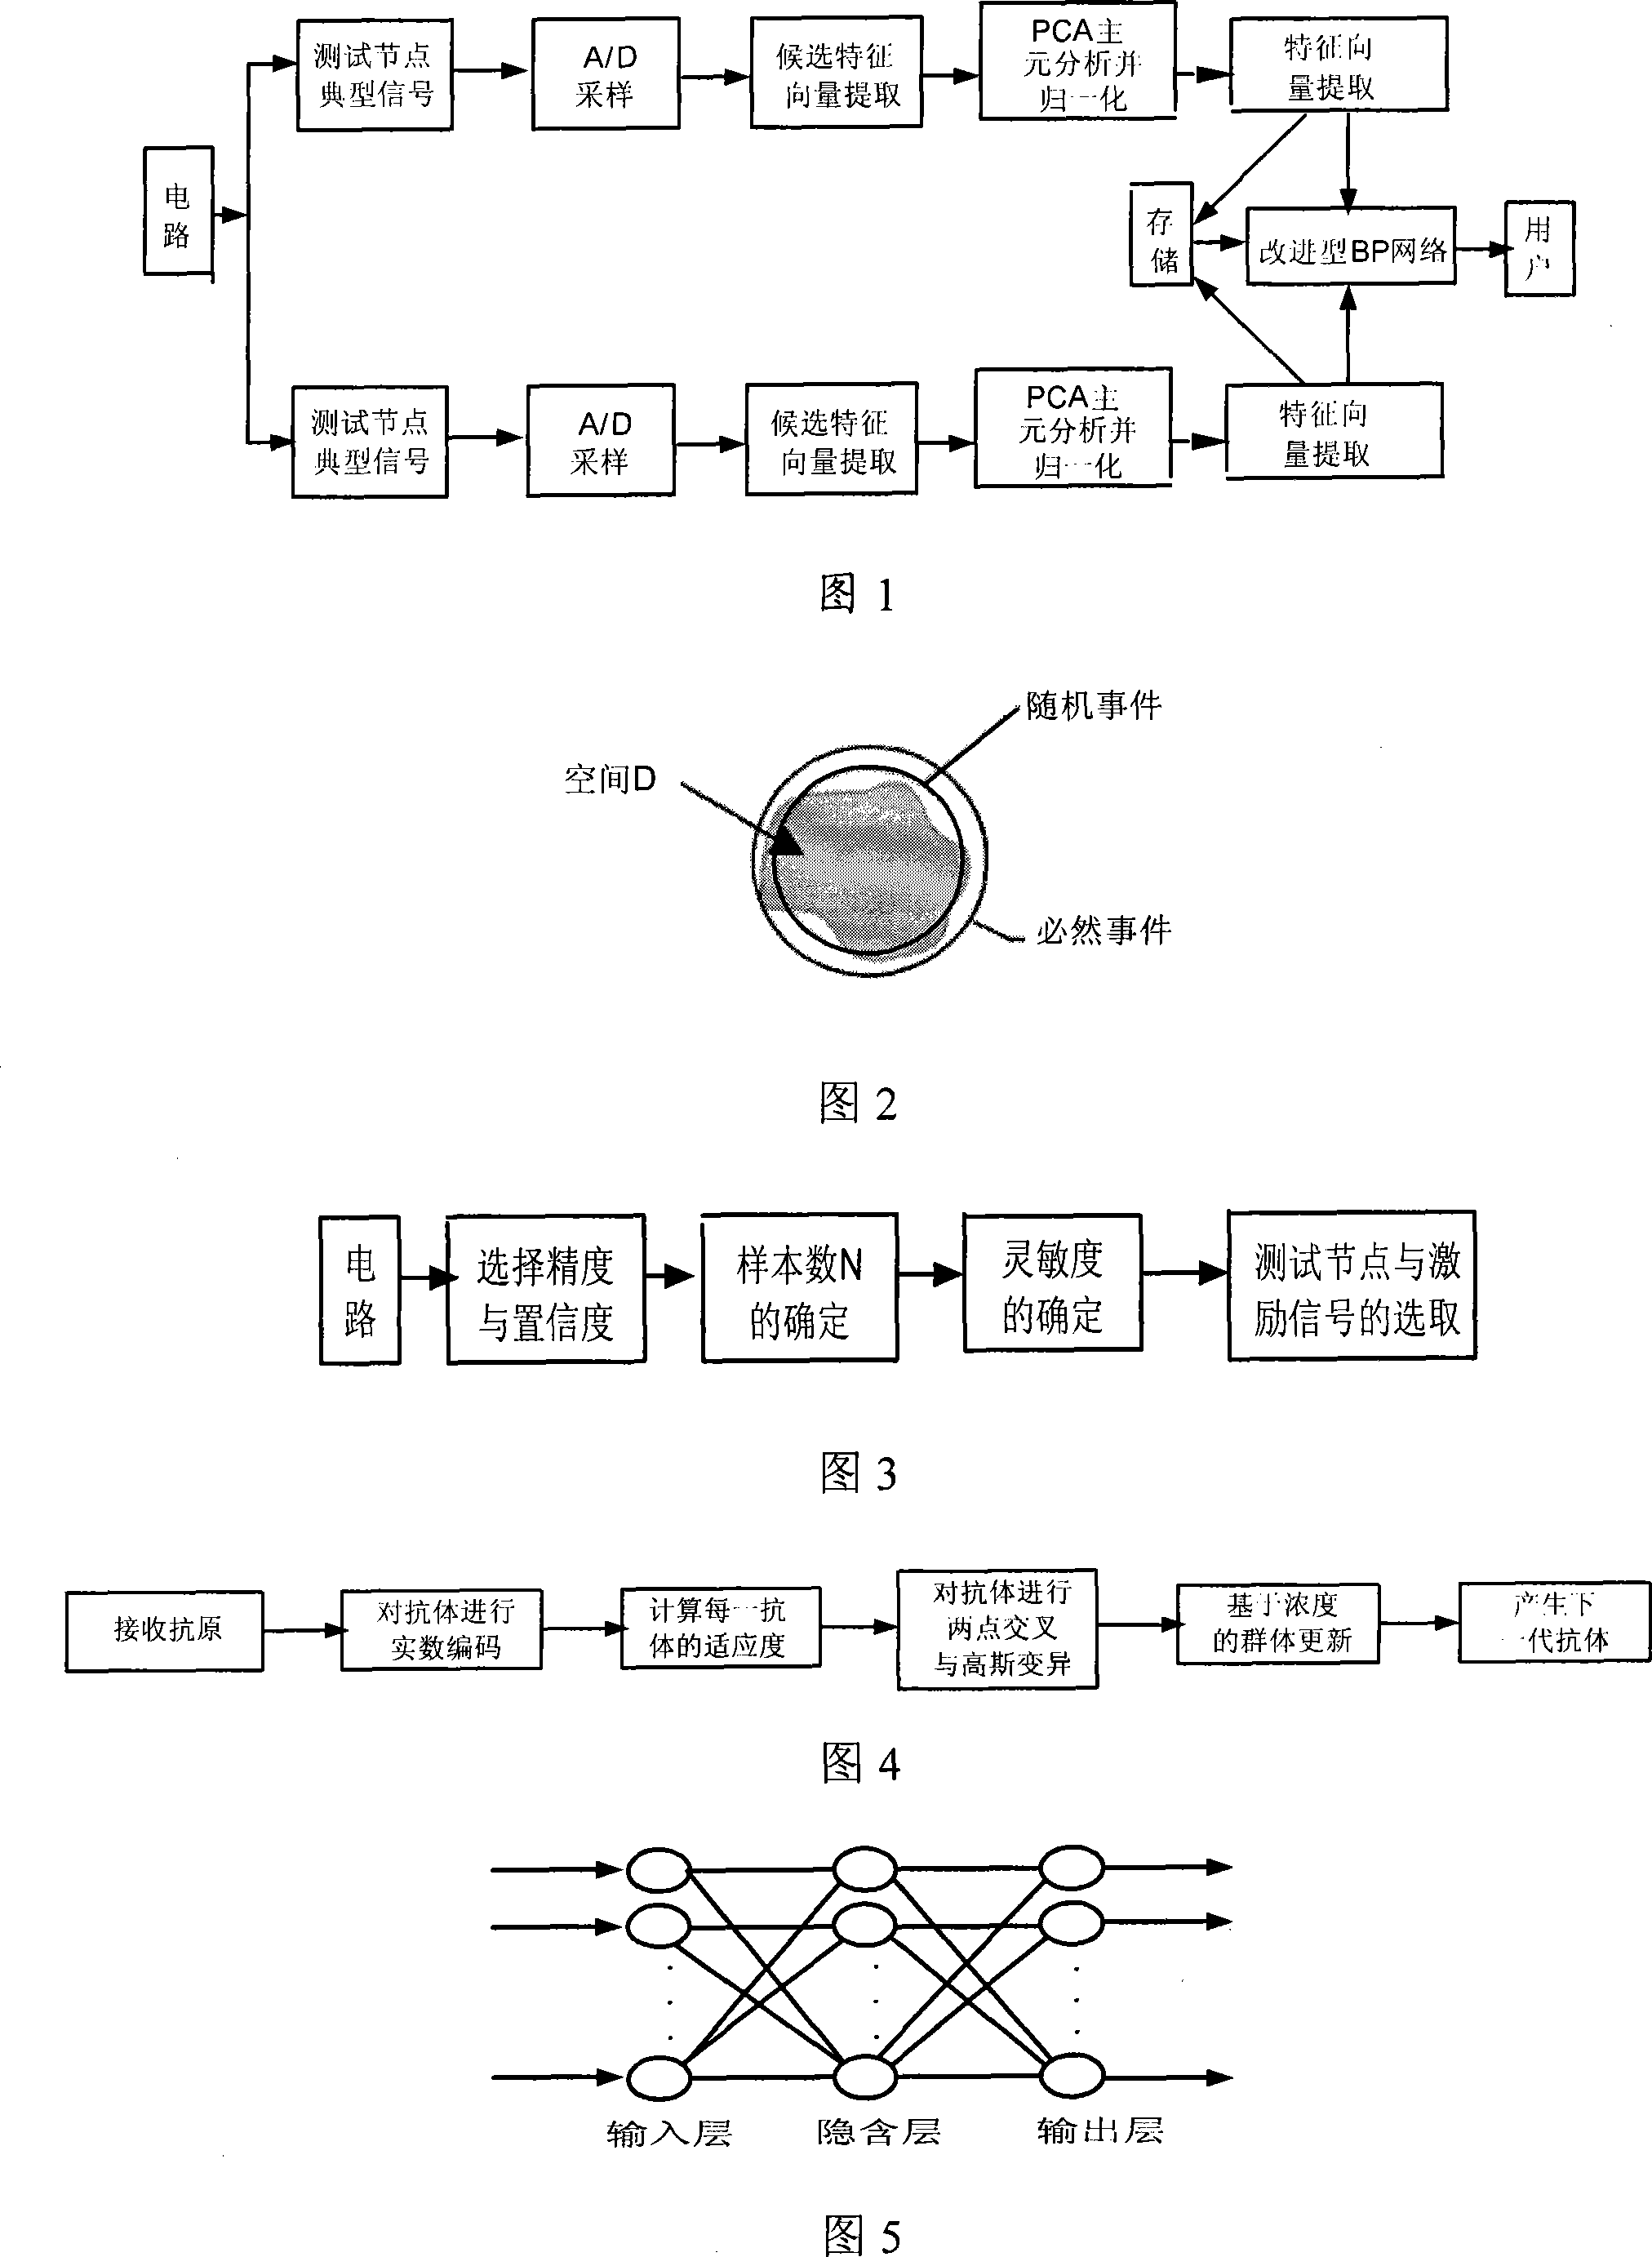 Method for diagnosing soft failure of analog circuit base on modified type BP neural network